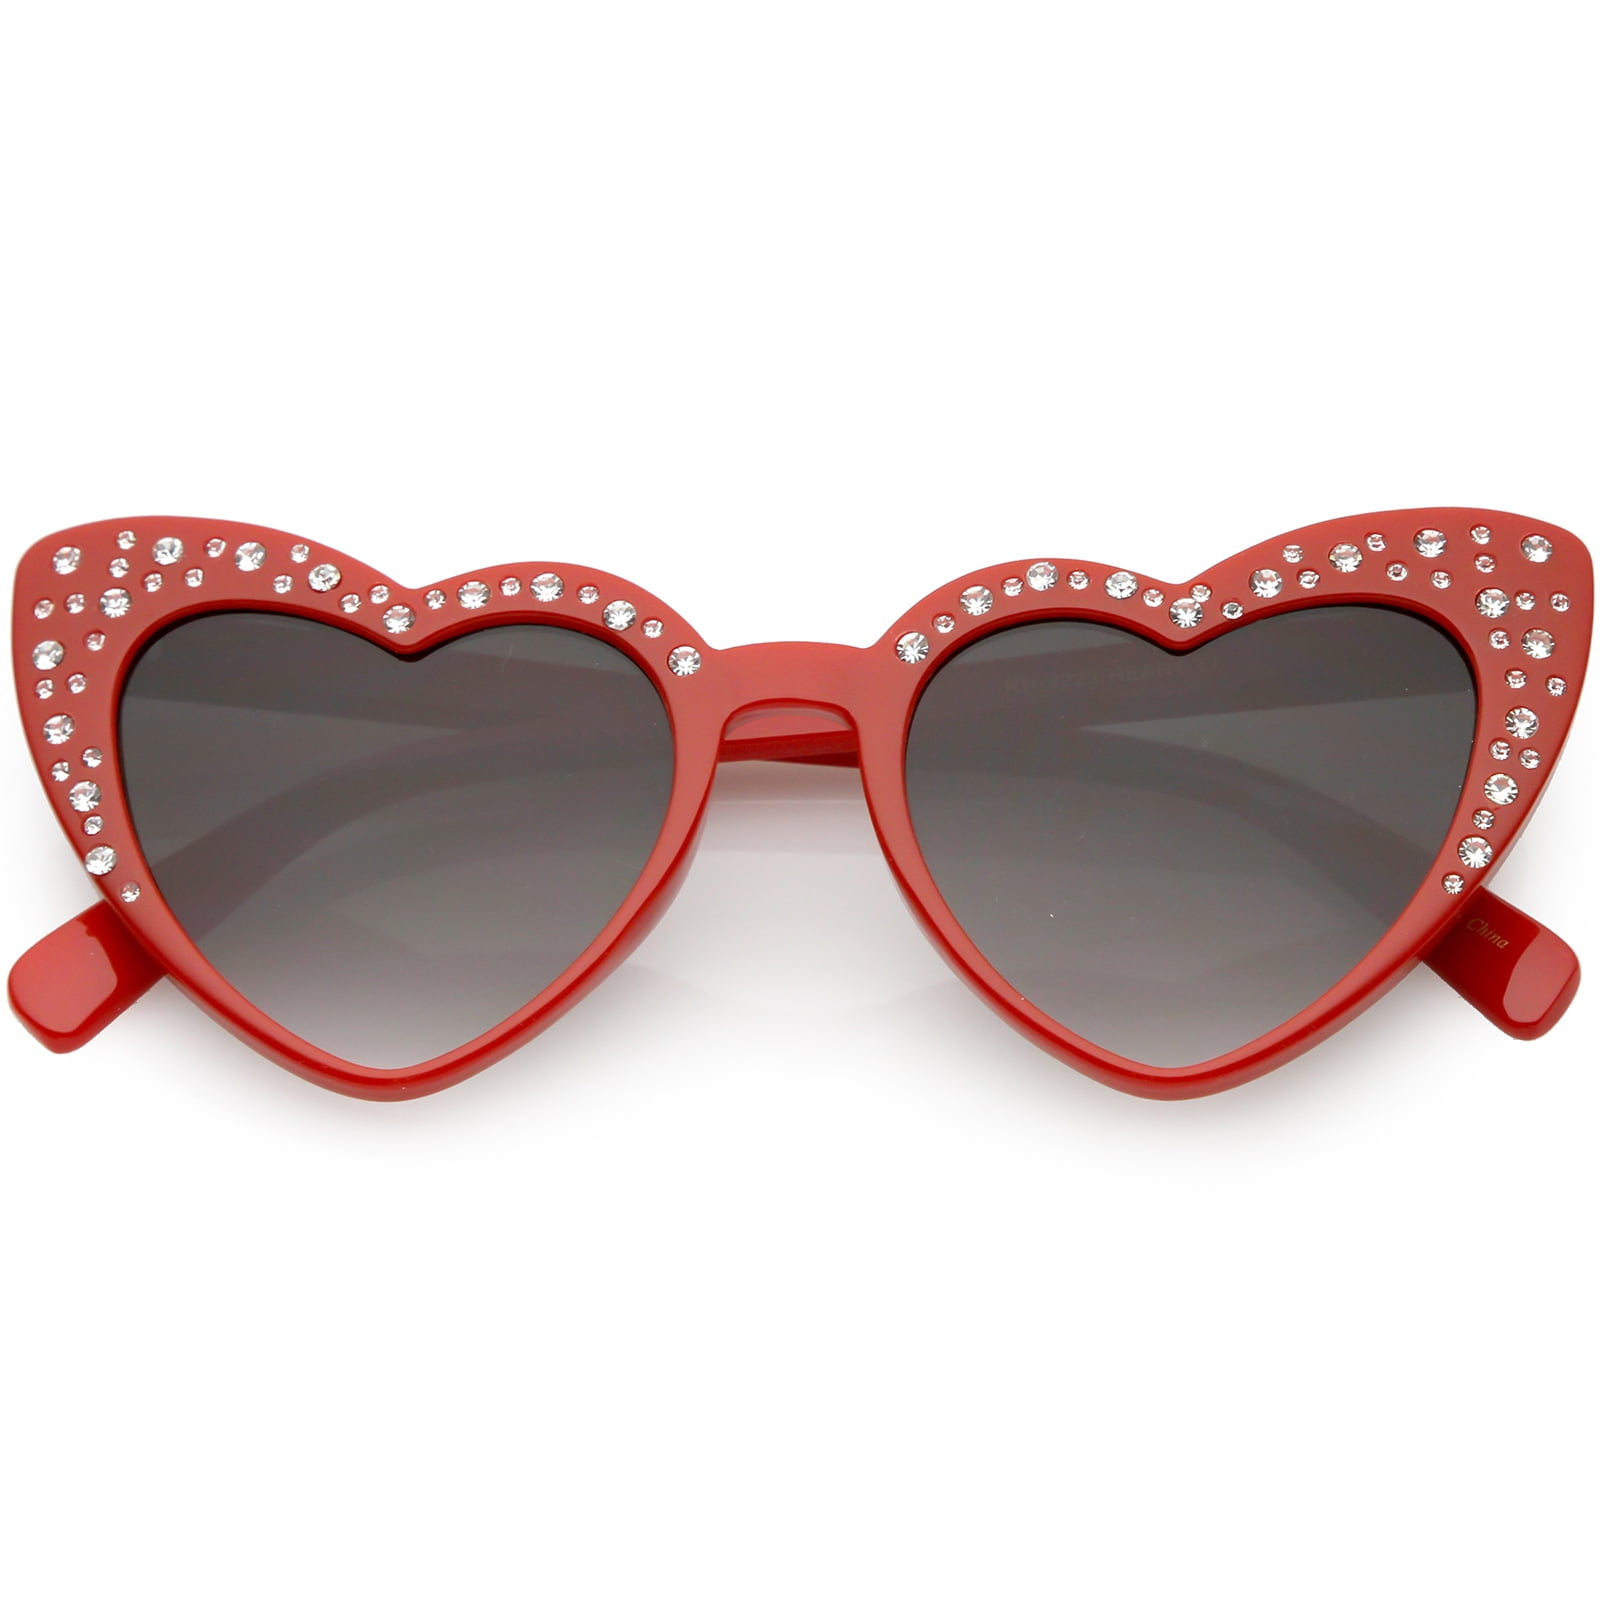 Oversize Rhinestone Heart Sunglasses High Sitting Arms Gradient Lens 51mm Red Lavender